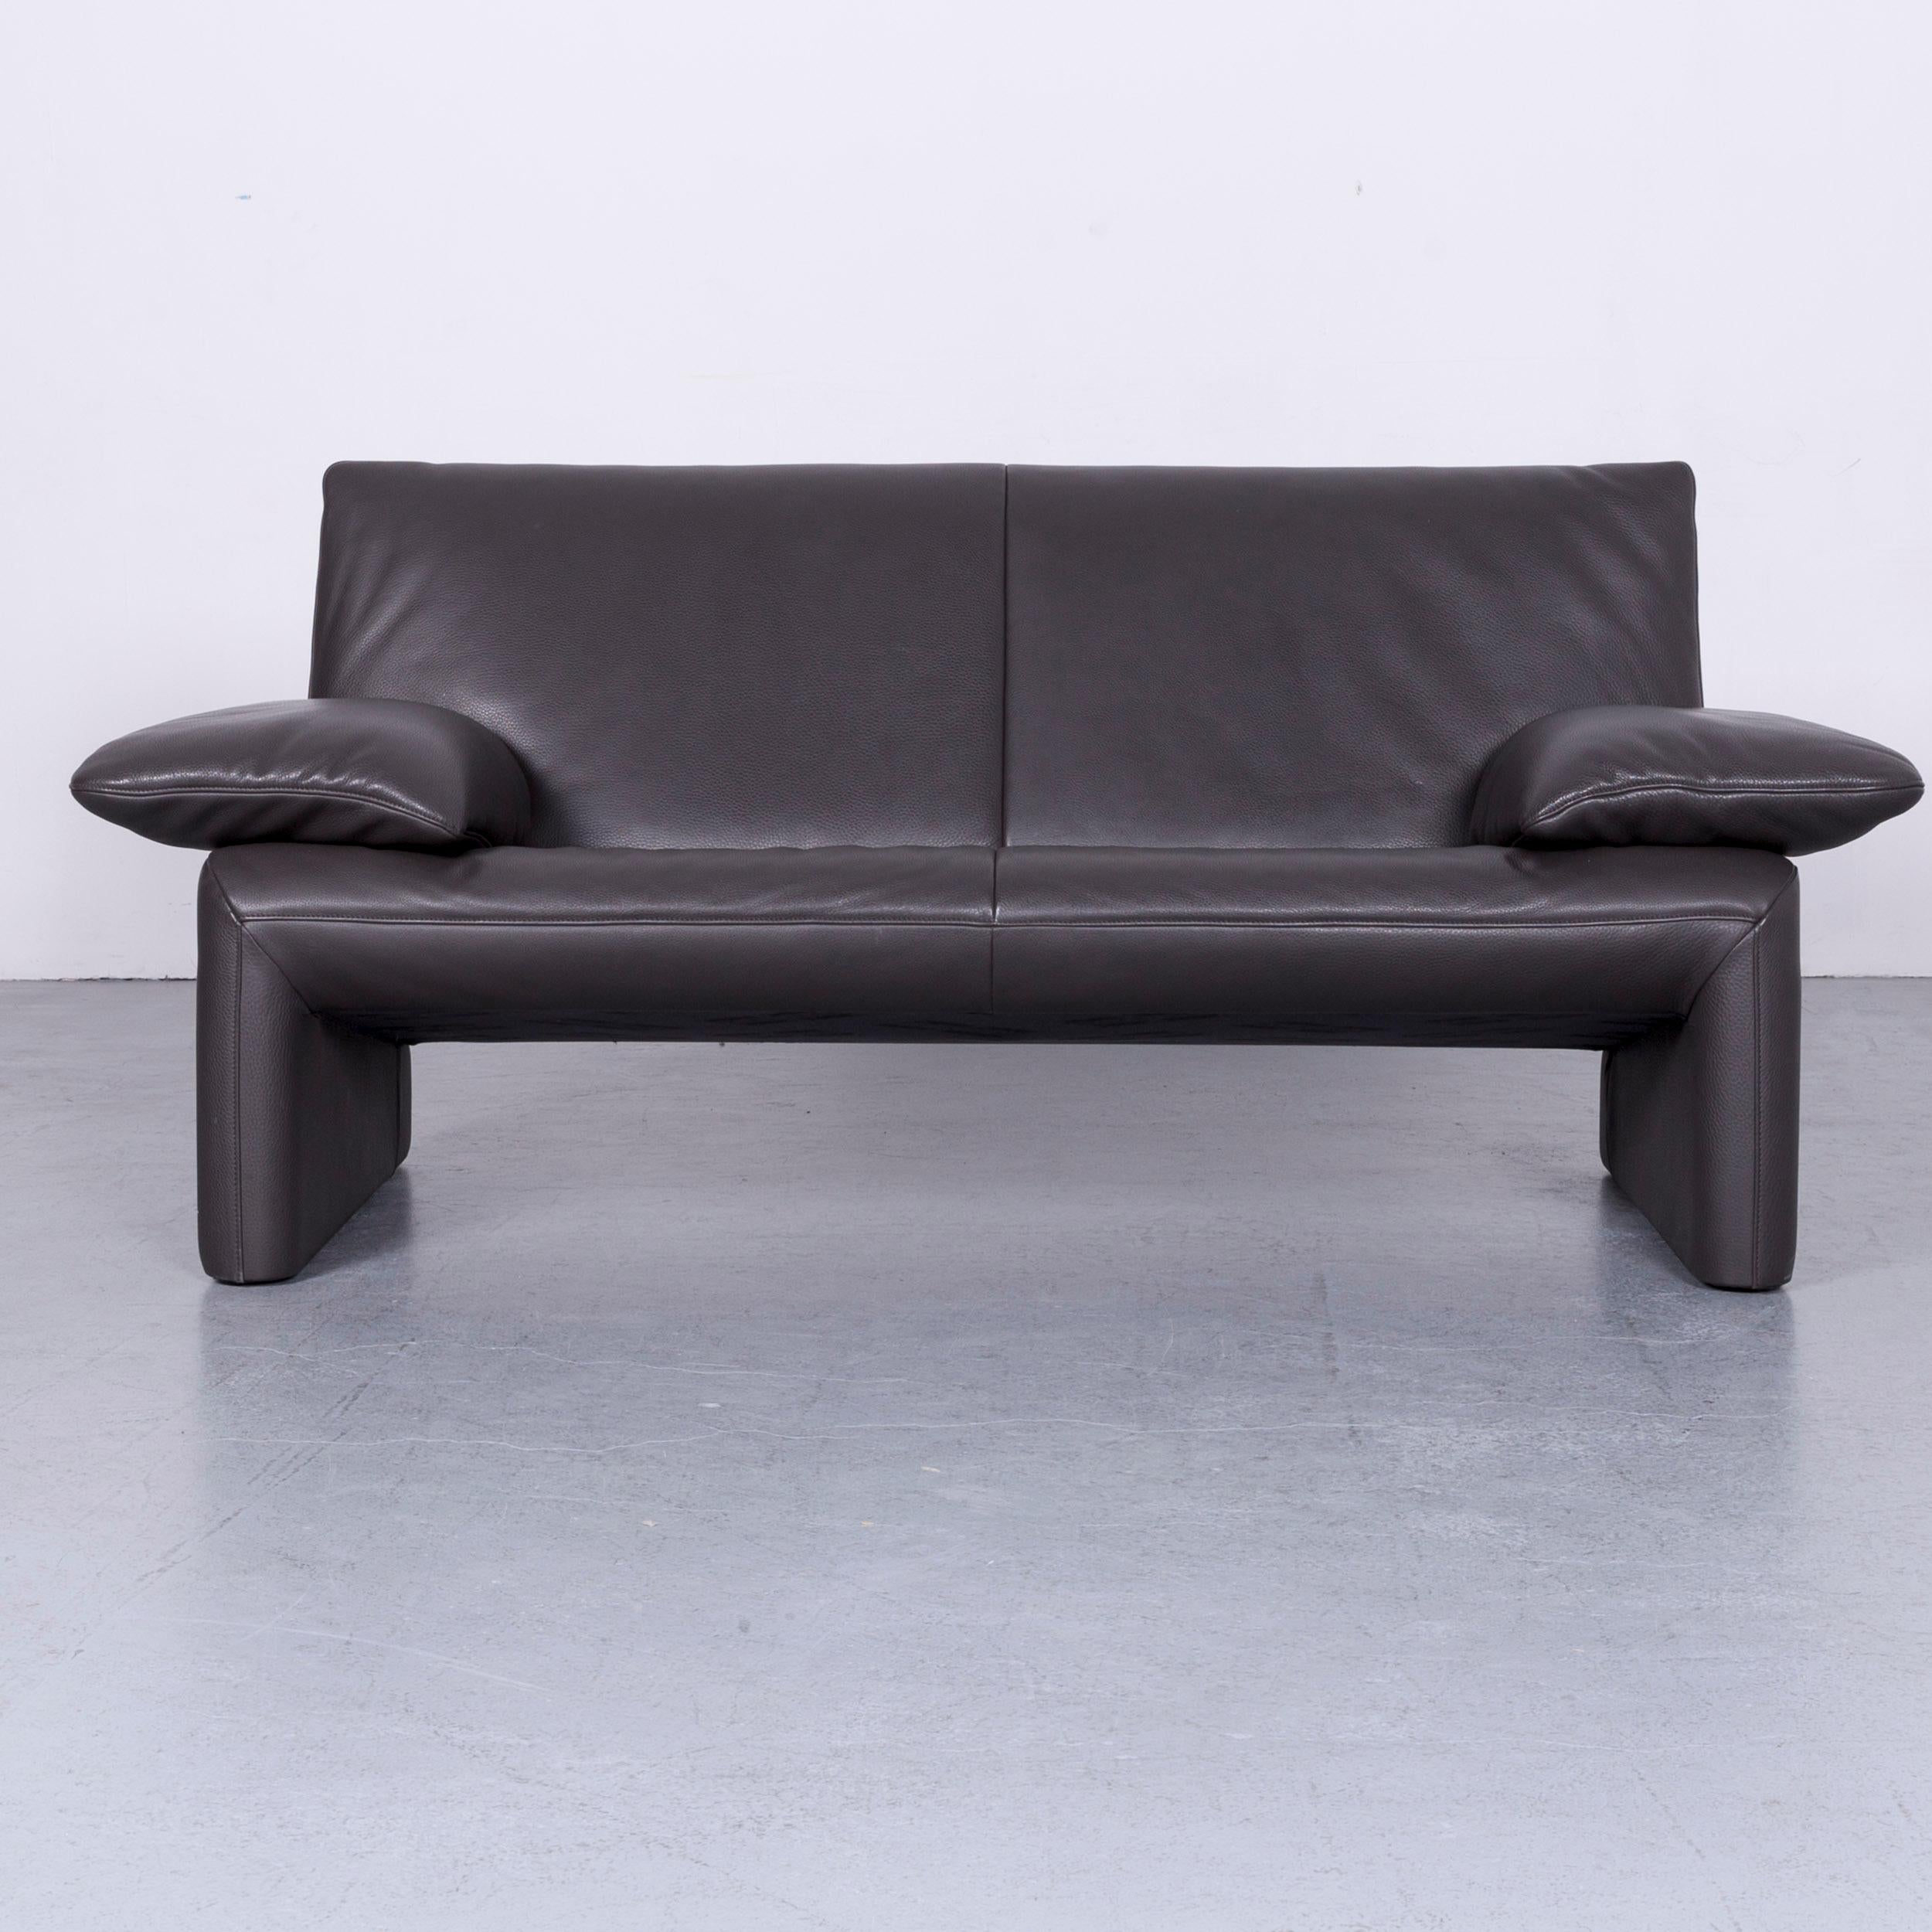 We bring to you an Jori linea designer leather sofa foot-stool set grey two-seat couch.